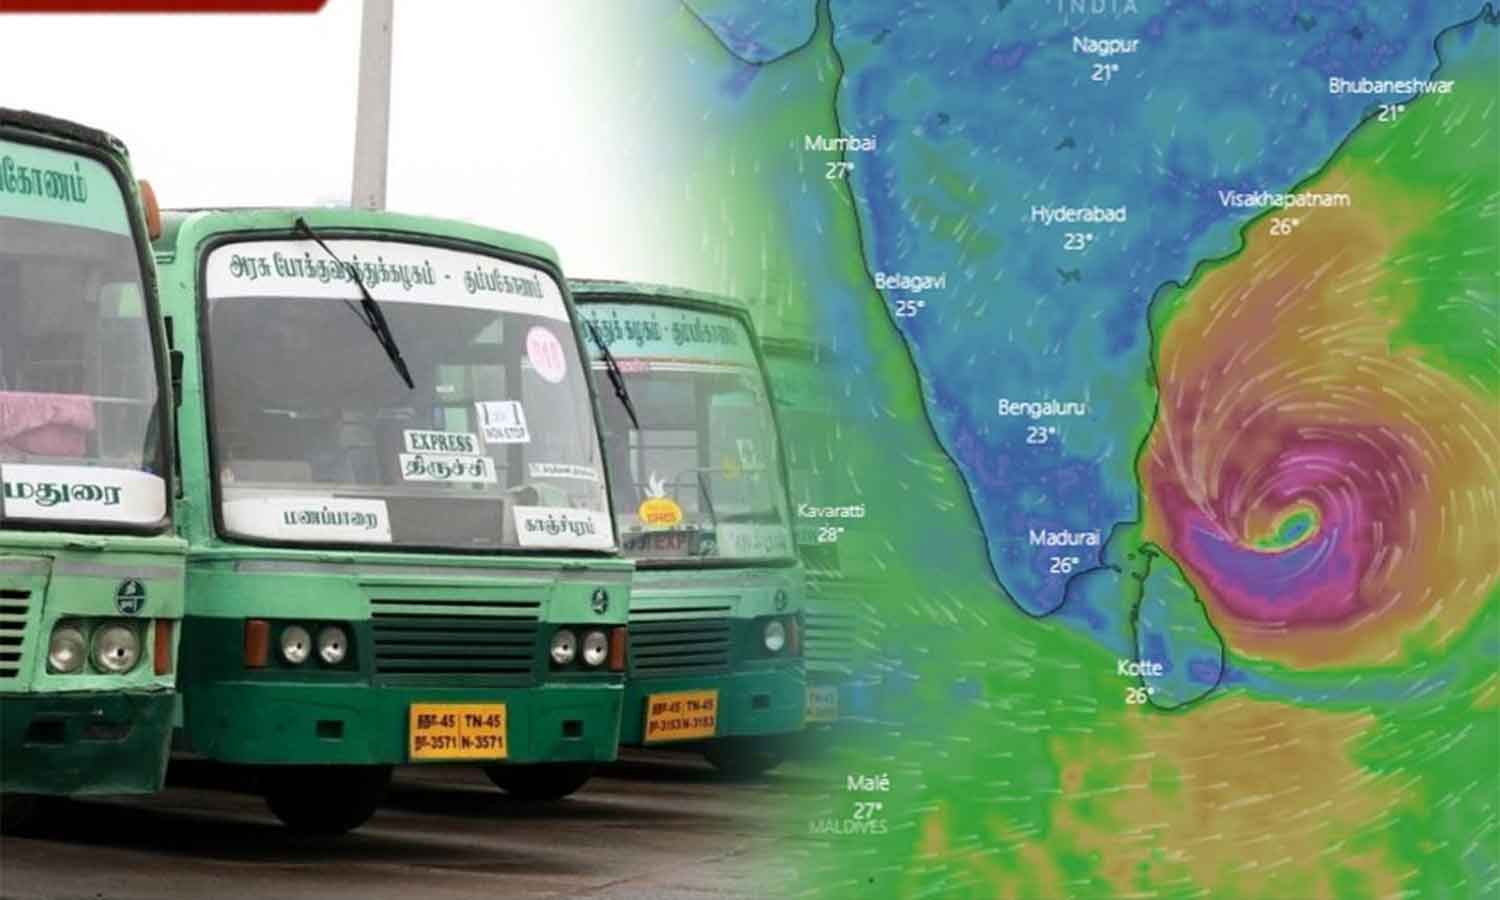 No night buses should be operated during the storm landfall- Tamil Nadu government orders